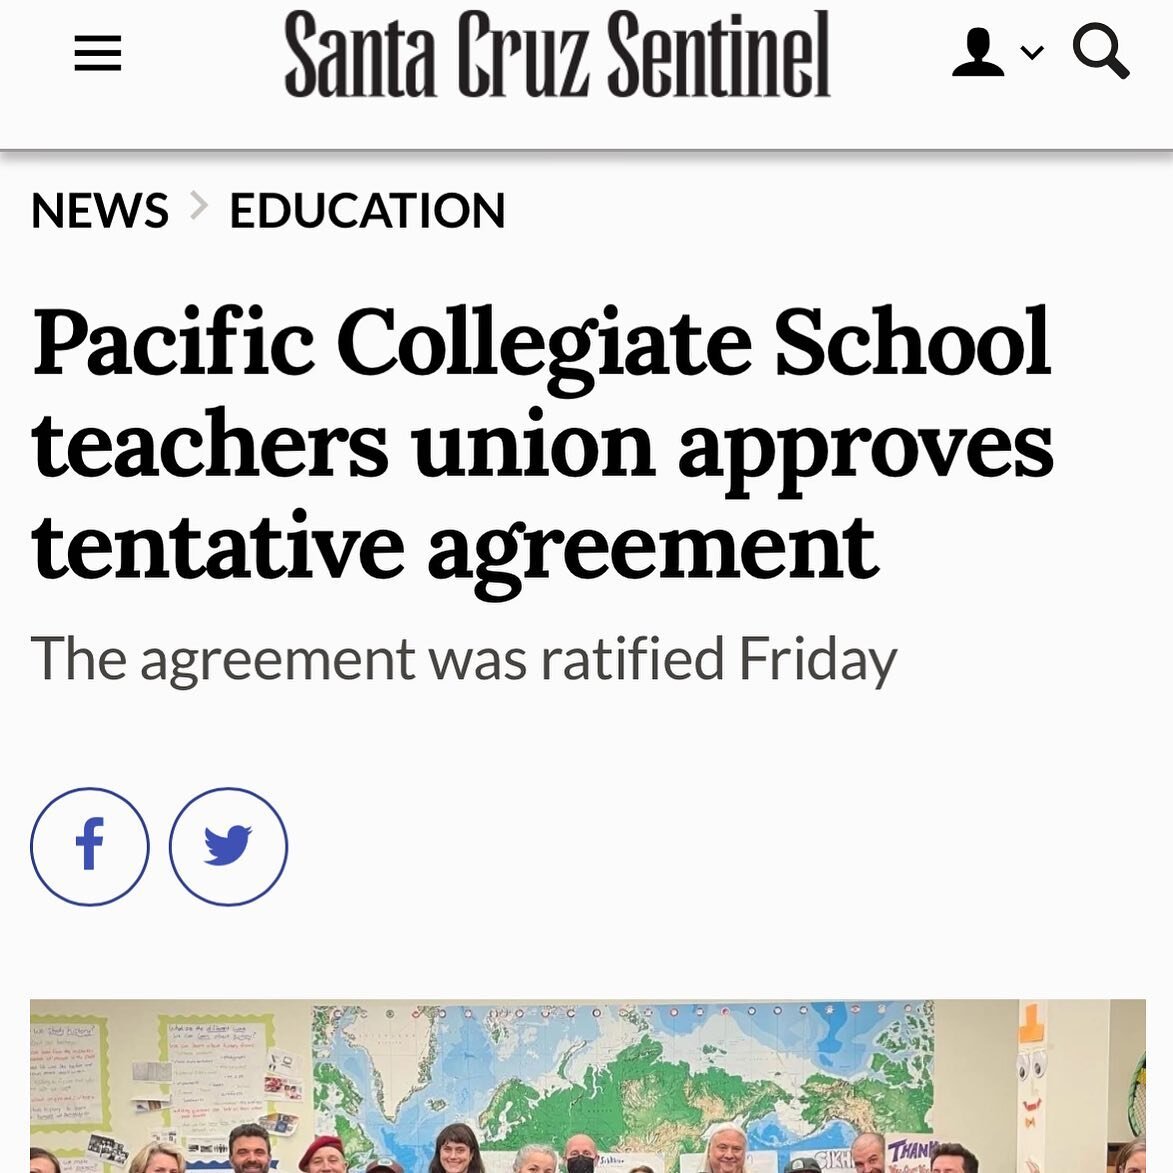 The votes are in! Our membership has approved the tentative agreement! We couldn&rsquo;t have done this without you - our incredible community; this historic achievement belongs to us all. Link in stories. @scsentinel